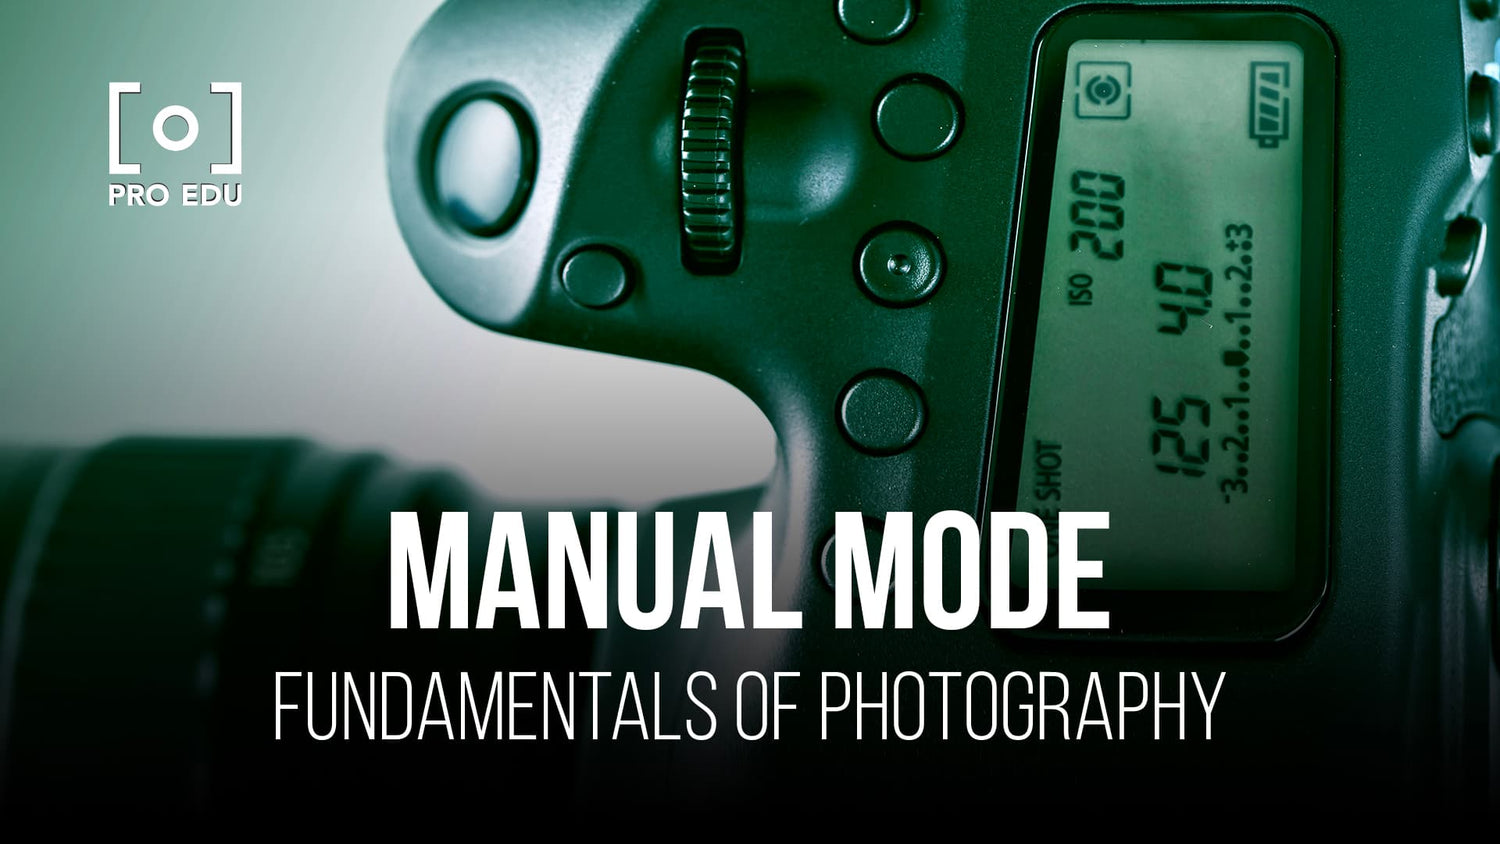 Taking control of your camera with manual mode, a comprehensive guide